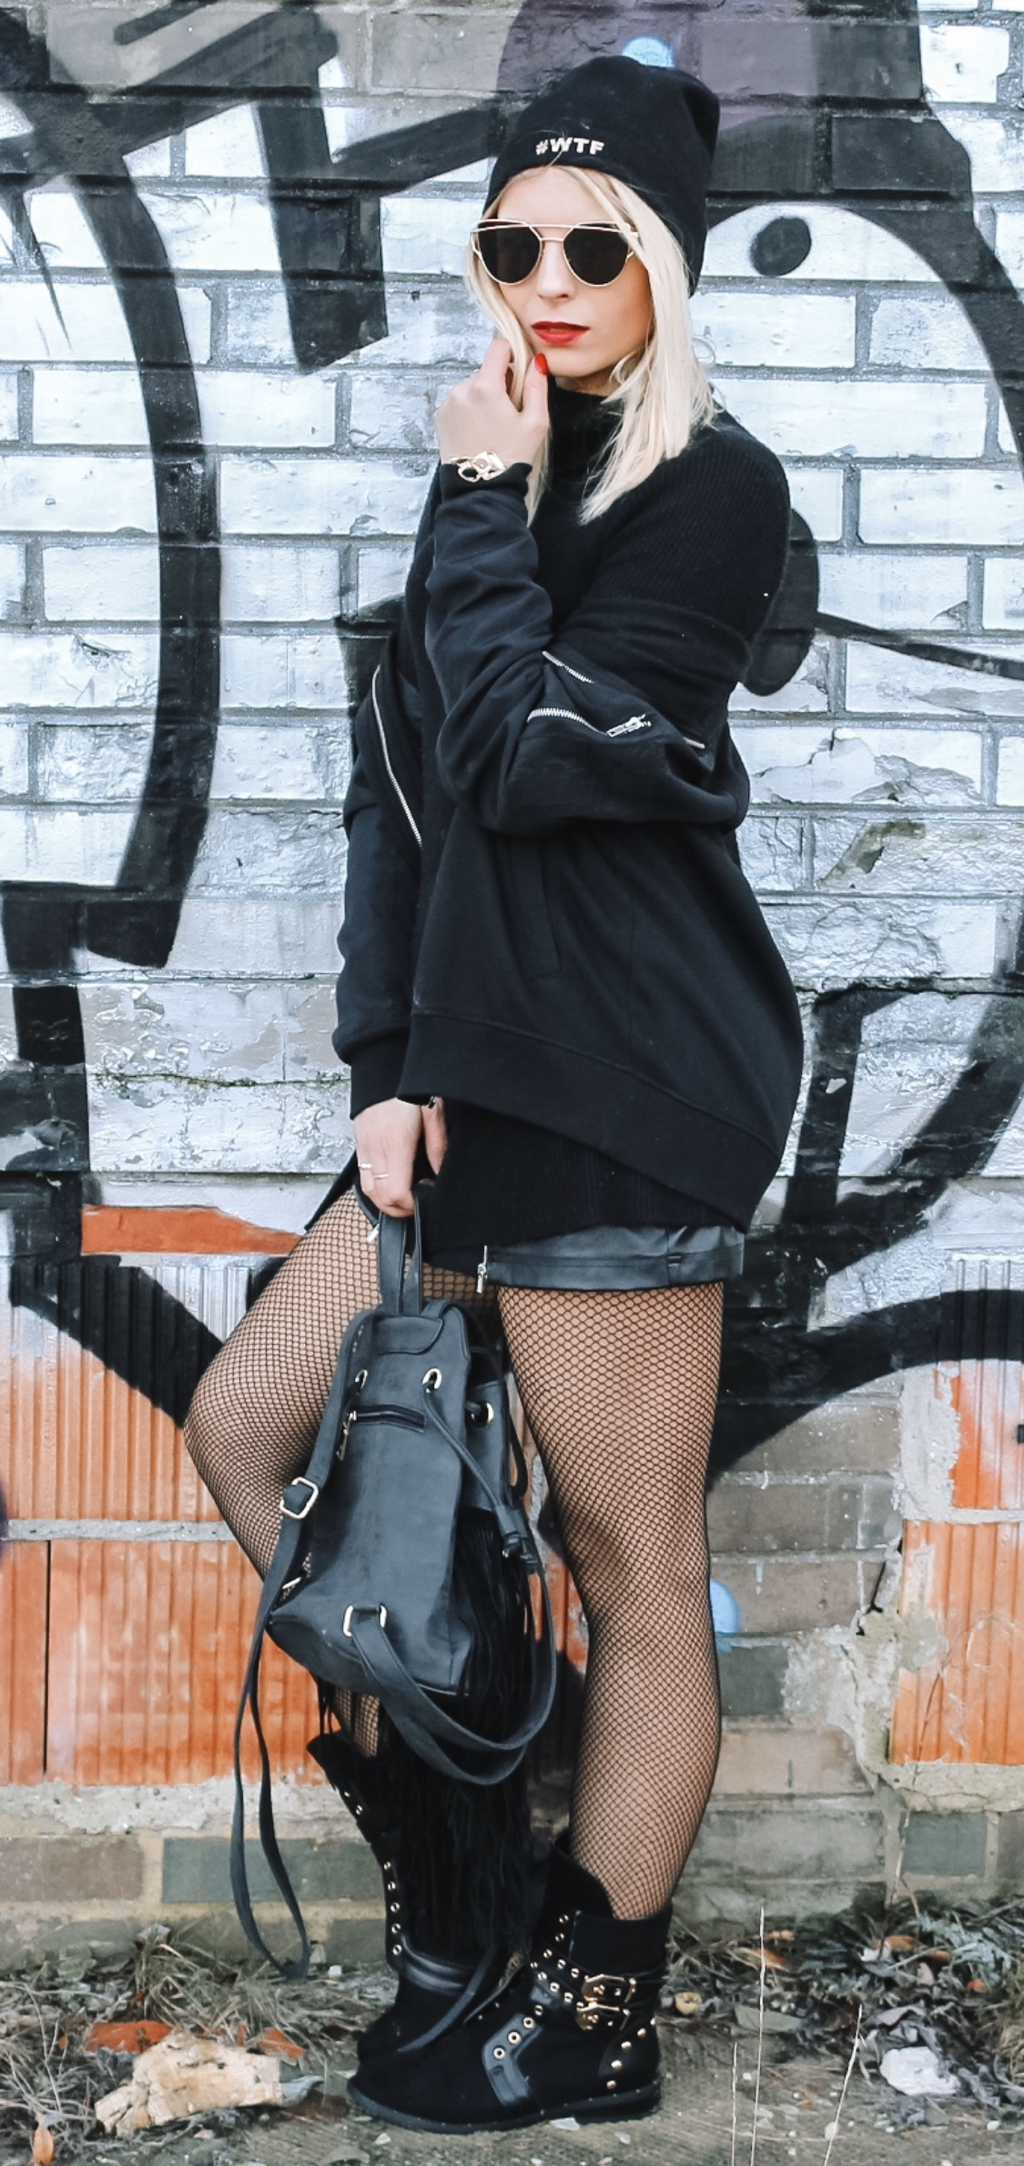 How to Wear Fishnet Tights, by Fashion Blogger